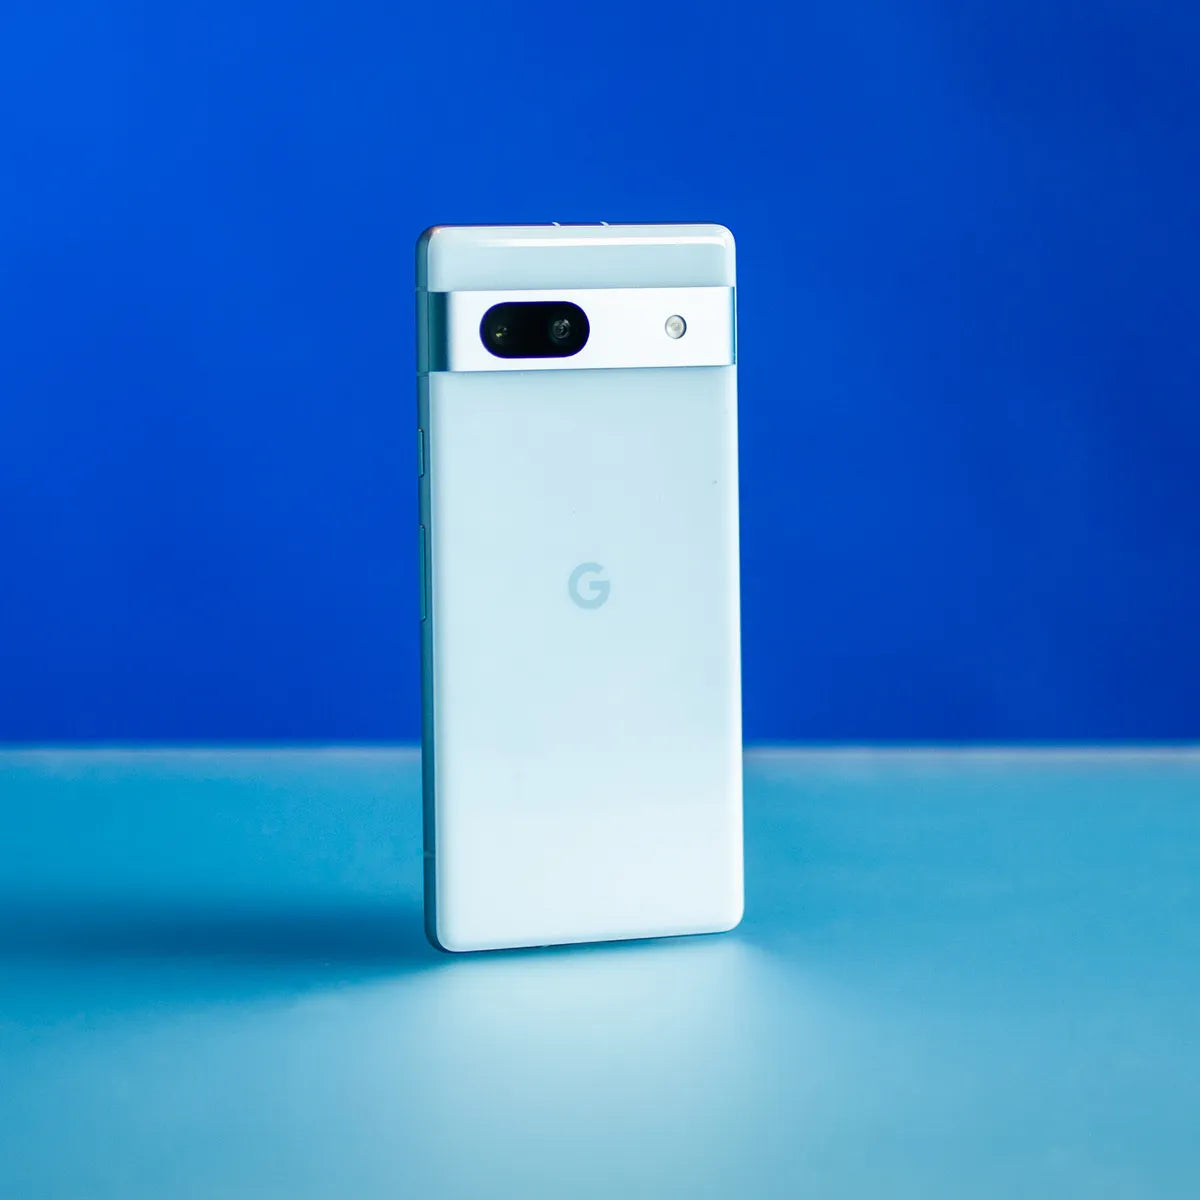 Google Pixel 7a (Pixel Buds A-Series and a limited-edition phone case bundle)